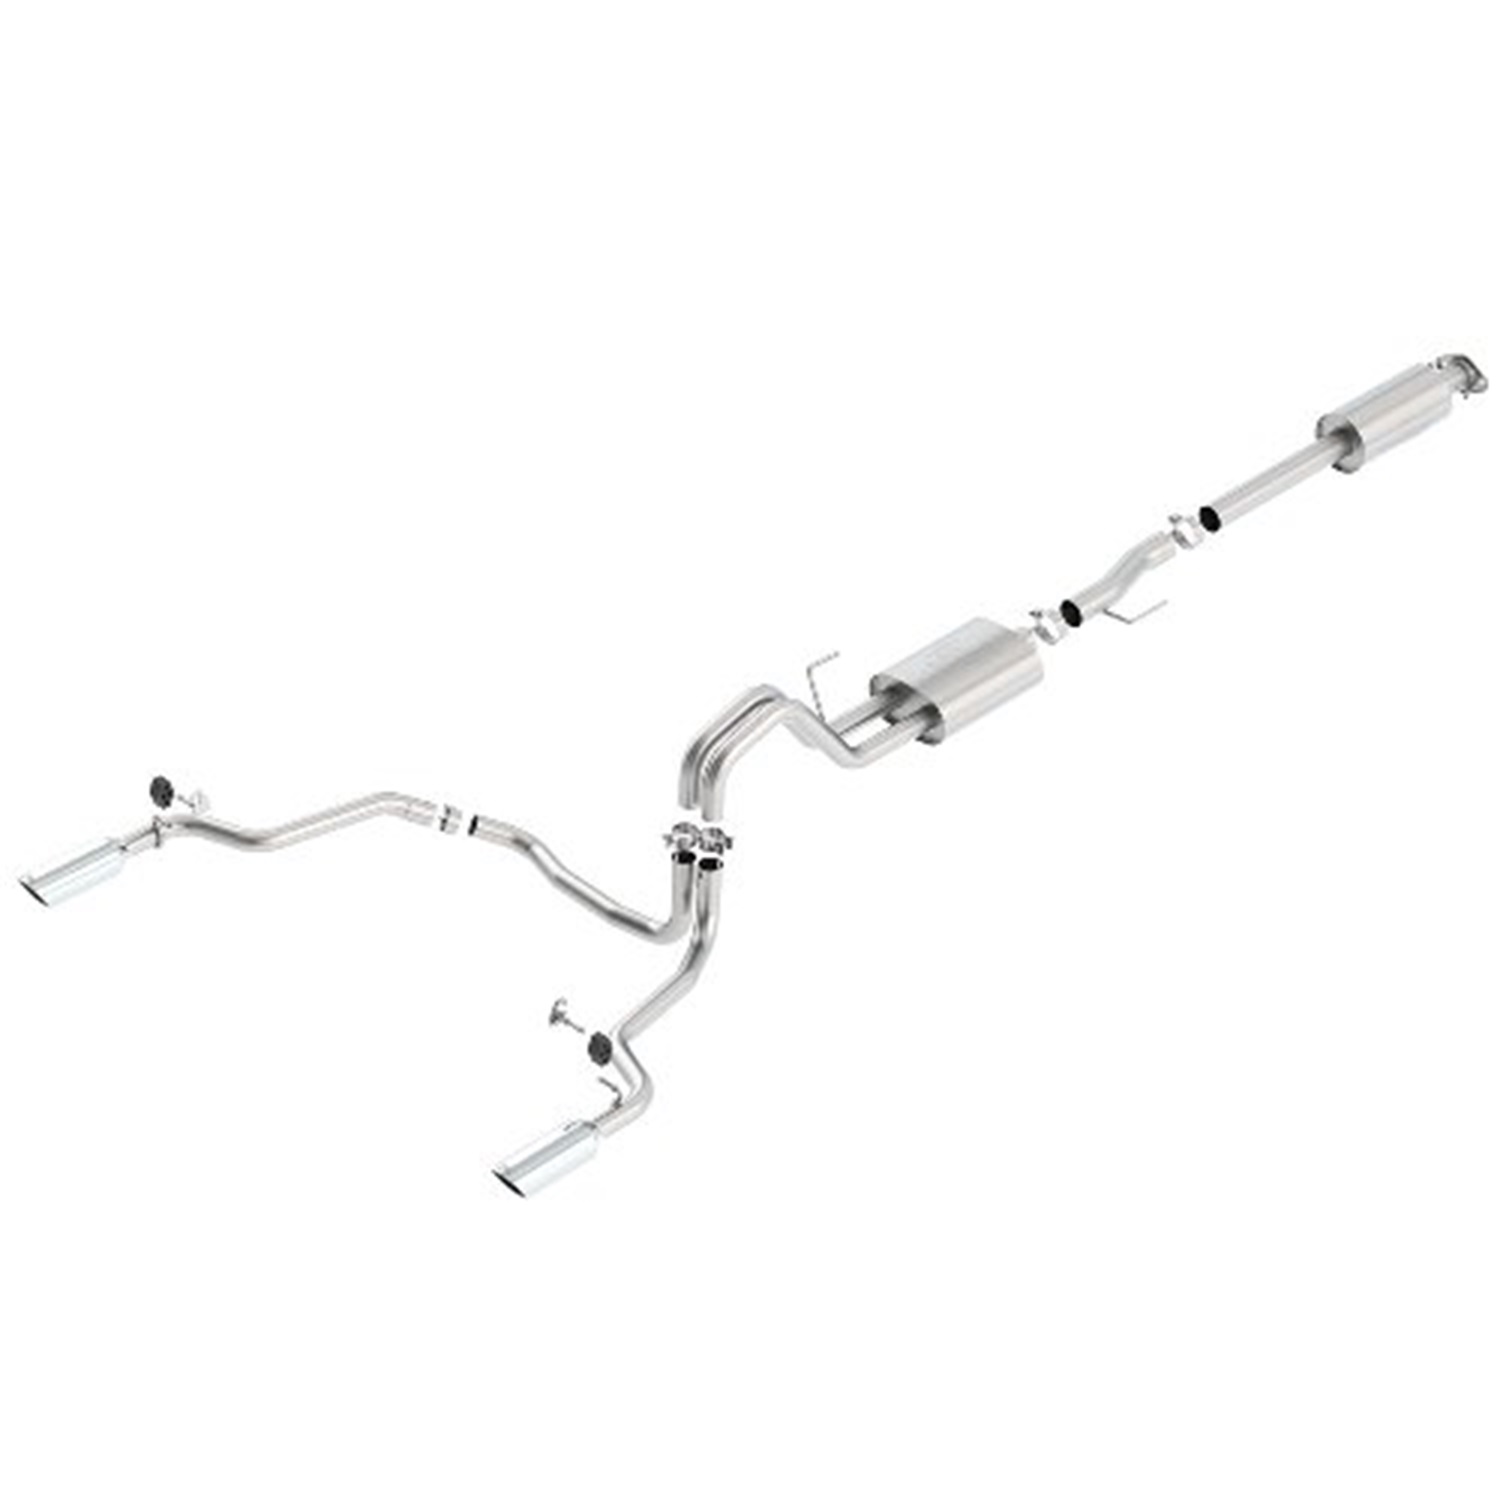 Ford Racing Ford Racing M-5200-F1527DSC Cat-Back Exhaust System Fits 15 F-150